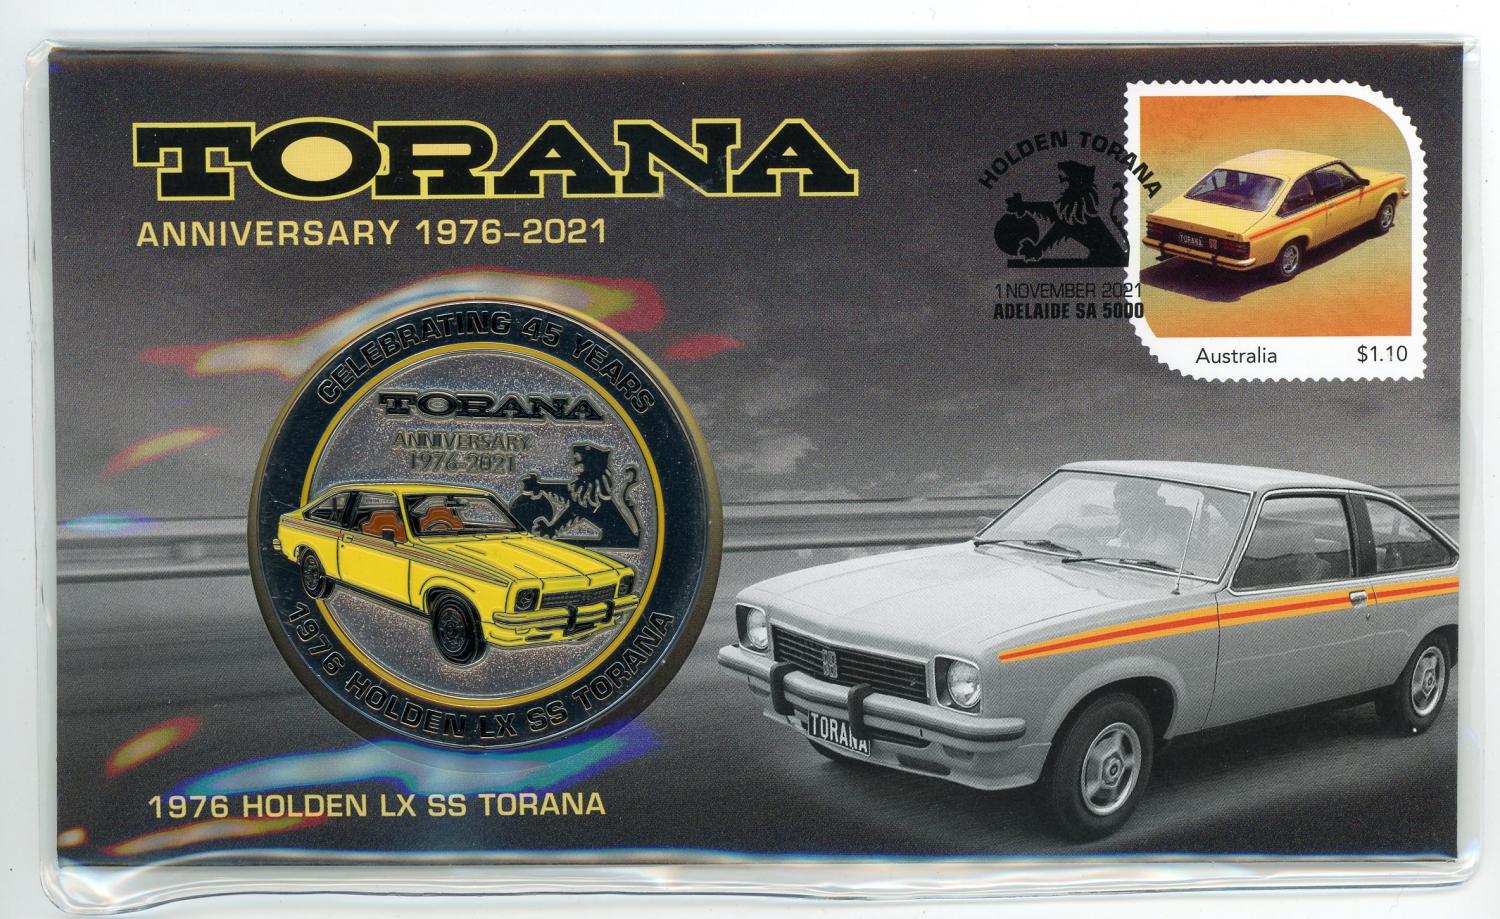 Thumbnail for 2021 45th Anniversary of Holden LX SS Torana Medallic PNC